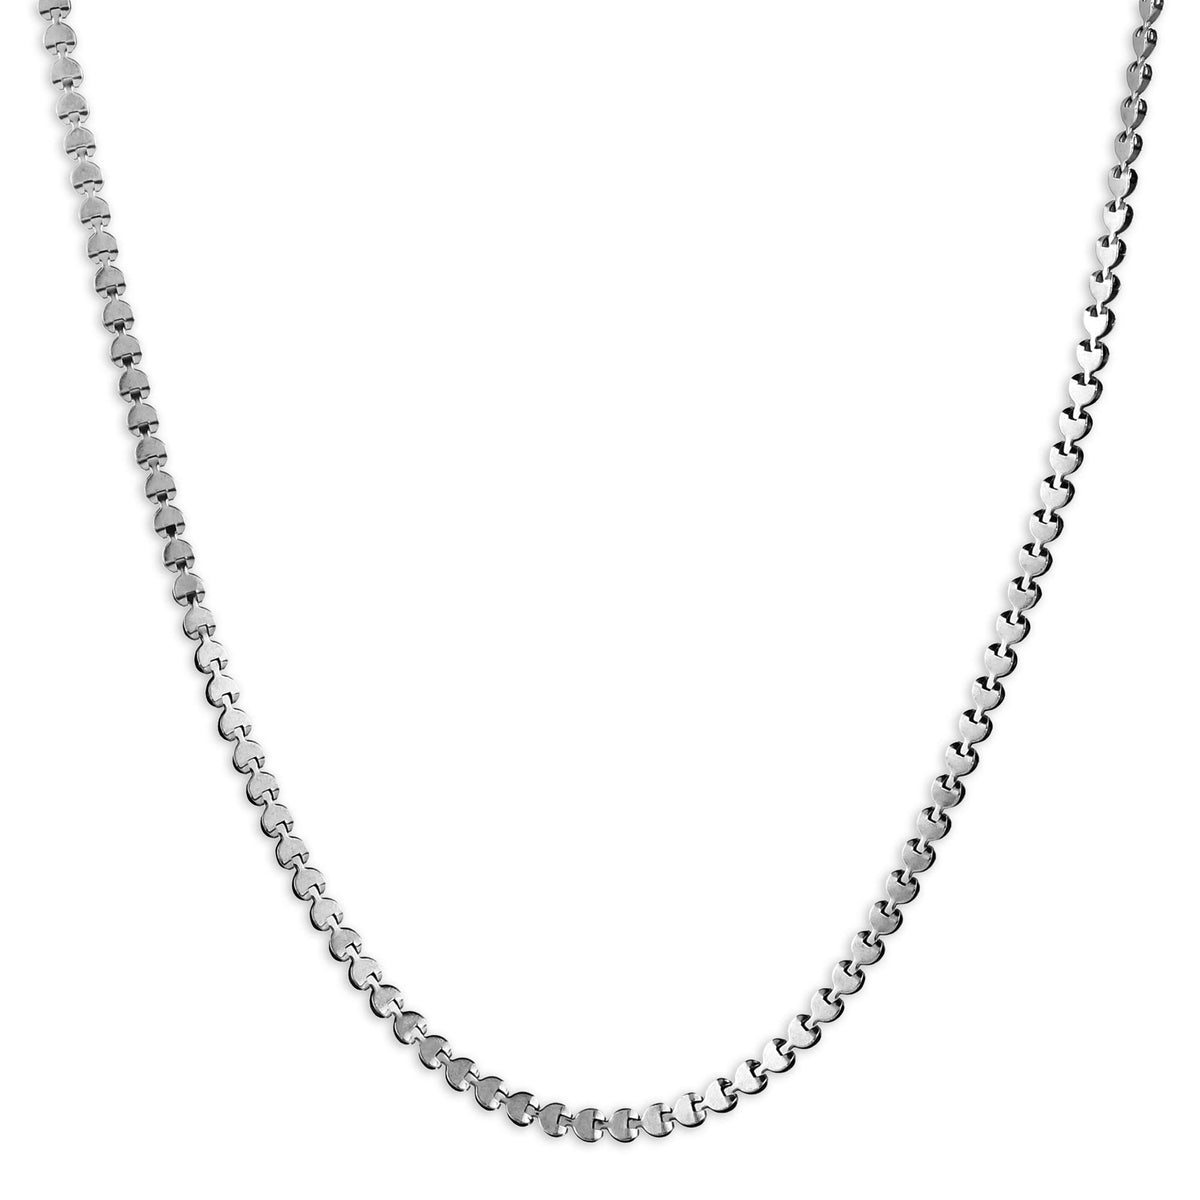 Yellow Chimes Classic 316L Stainless Steel Silver Chains for Men